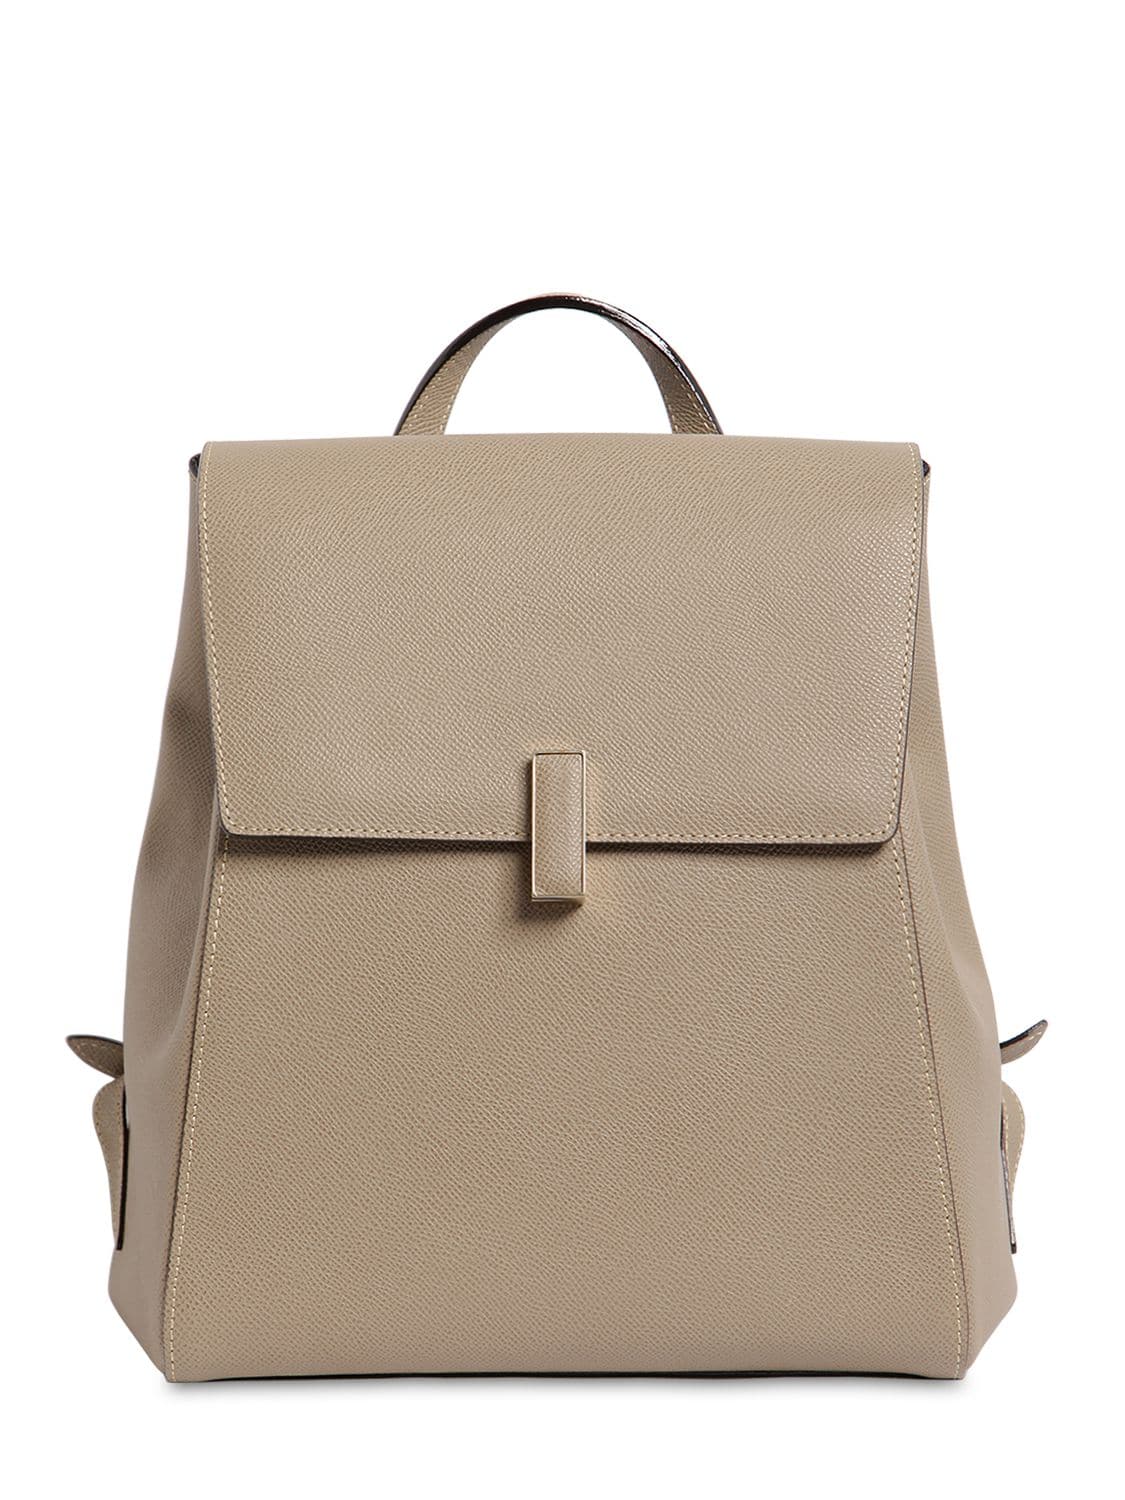 Valextra Iside Grained Leather Backpack In Oyster